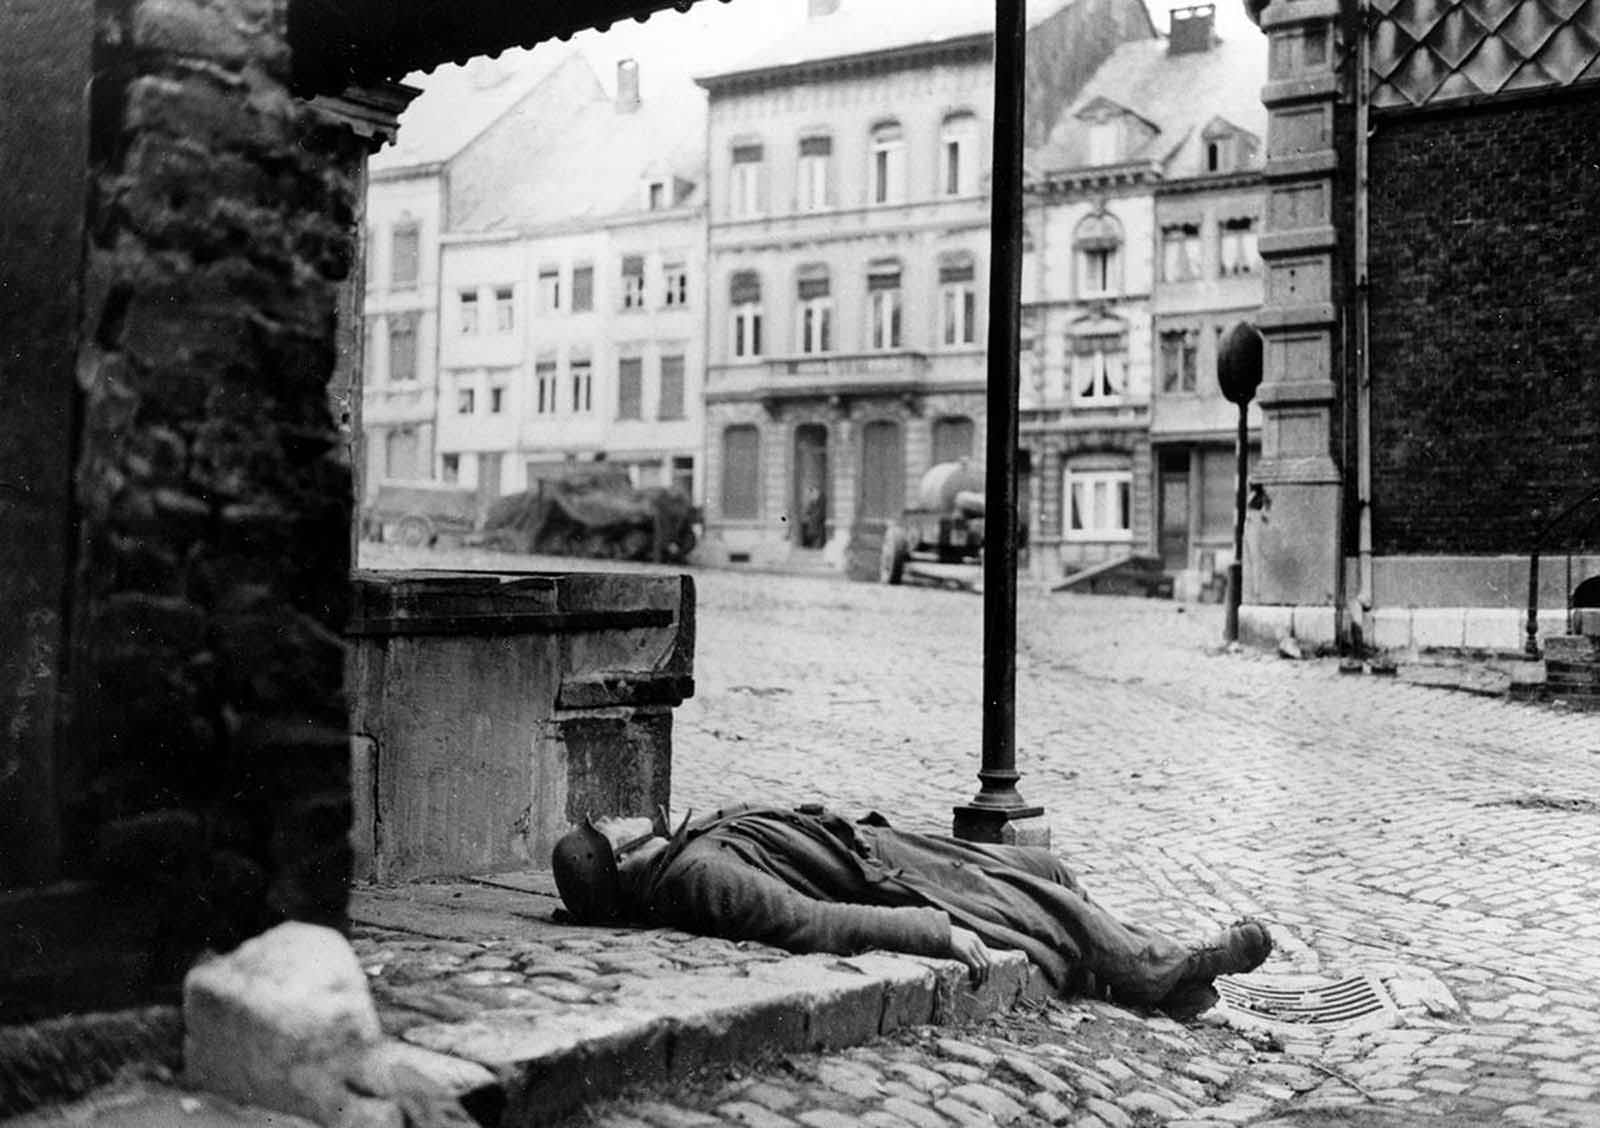 A dead German soldier, killed during the German counter offensive in the Belgium-Luxembourg salient, is left behind on a street corner in Stavelot, Belgium, on January 2, 1945, as fighting moves on during the Battle of the Bulge.